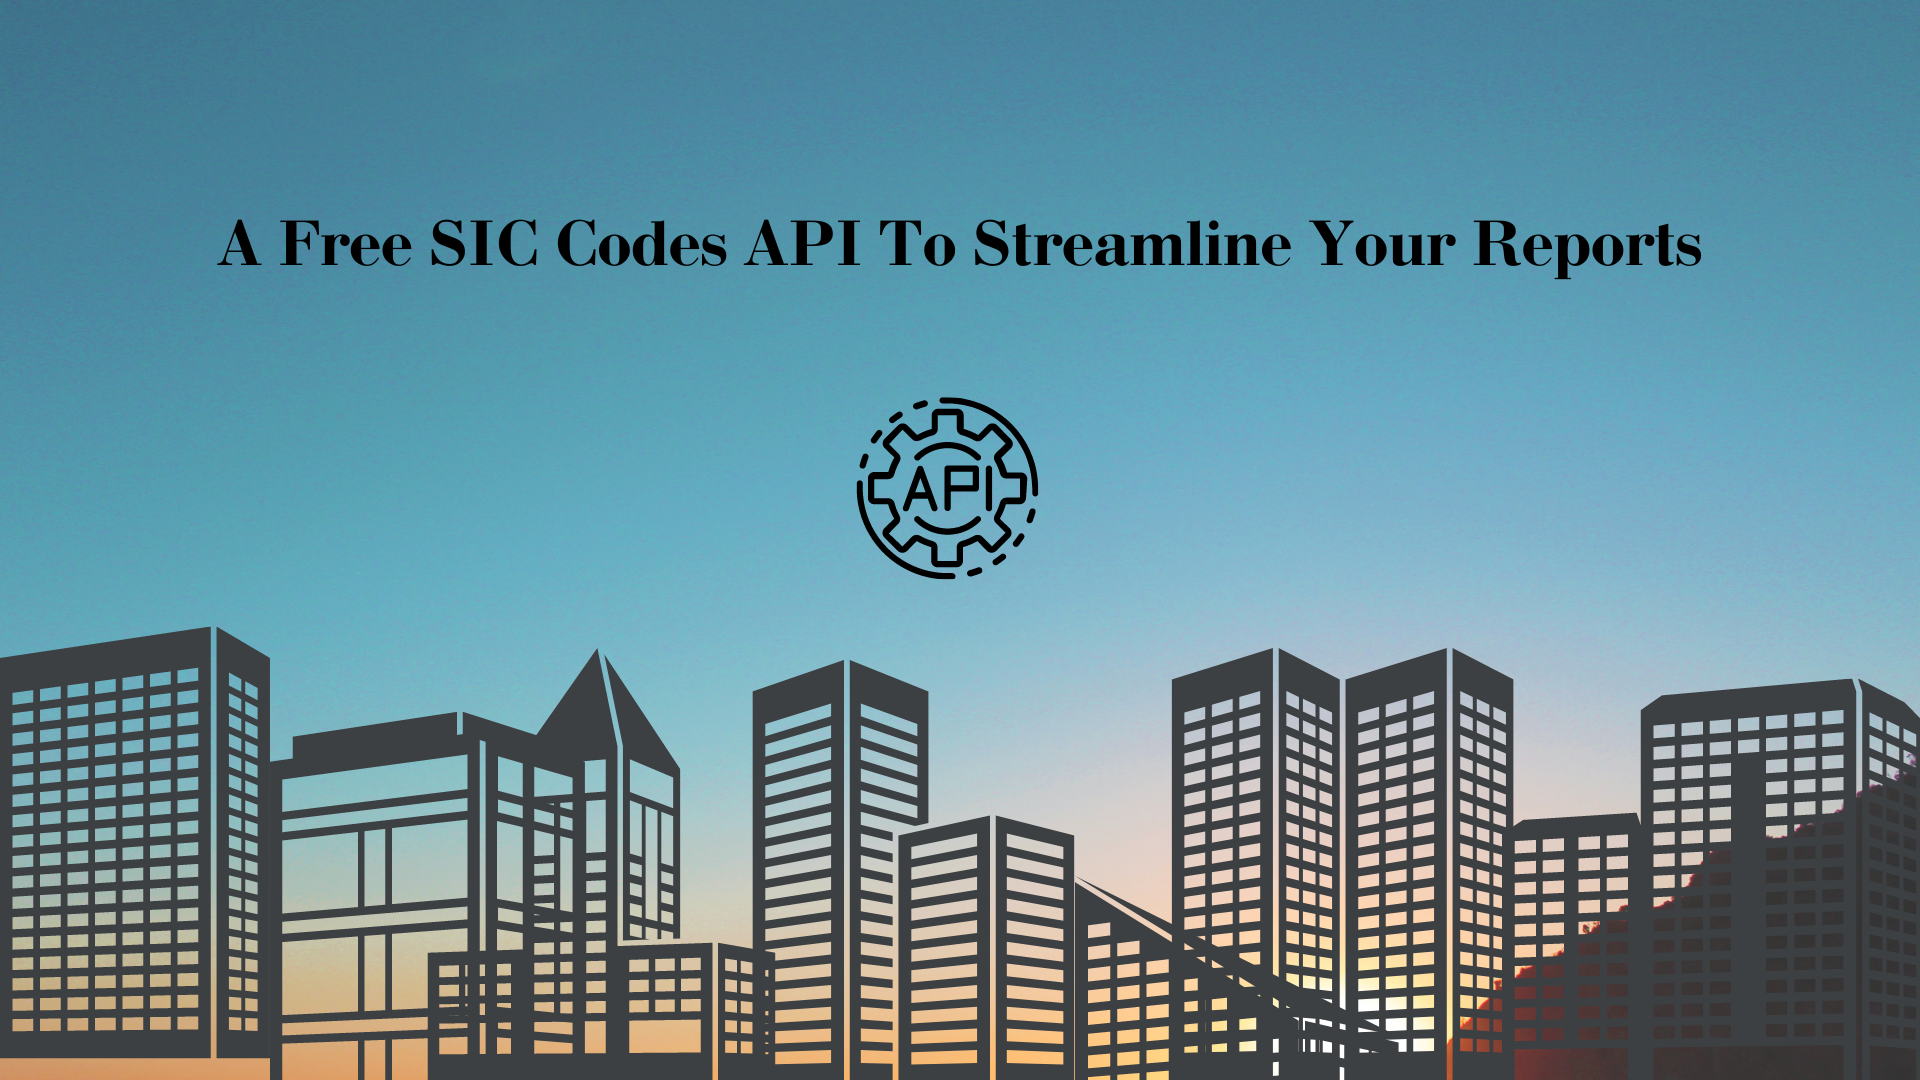 A Free Sic Codes API To Streamline Your Reports